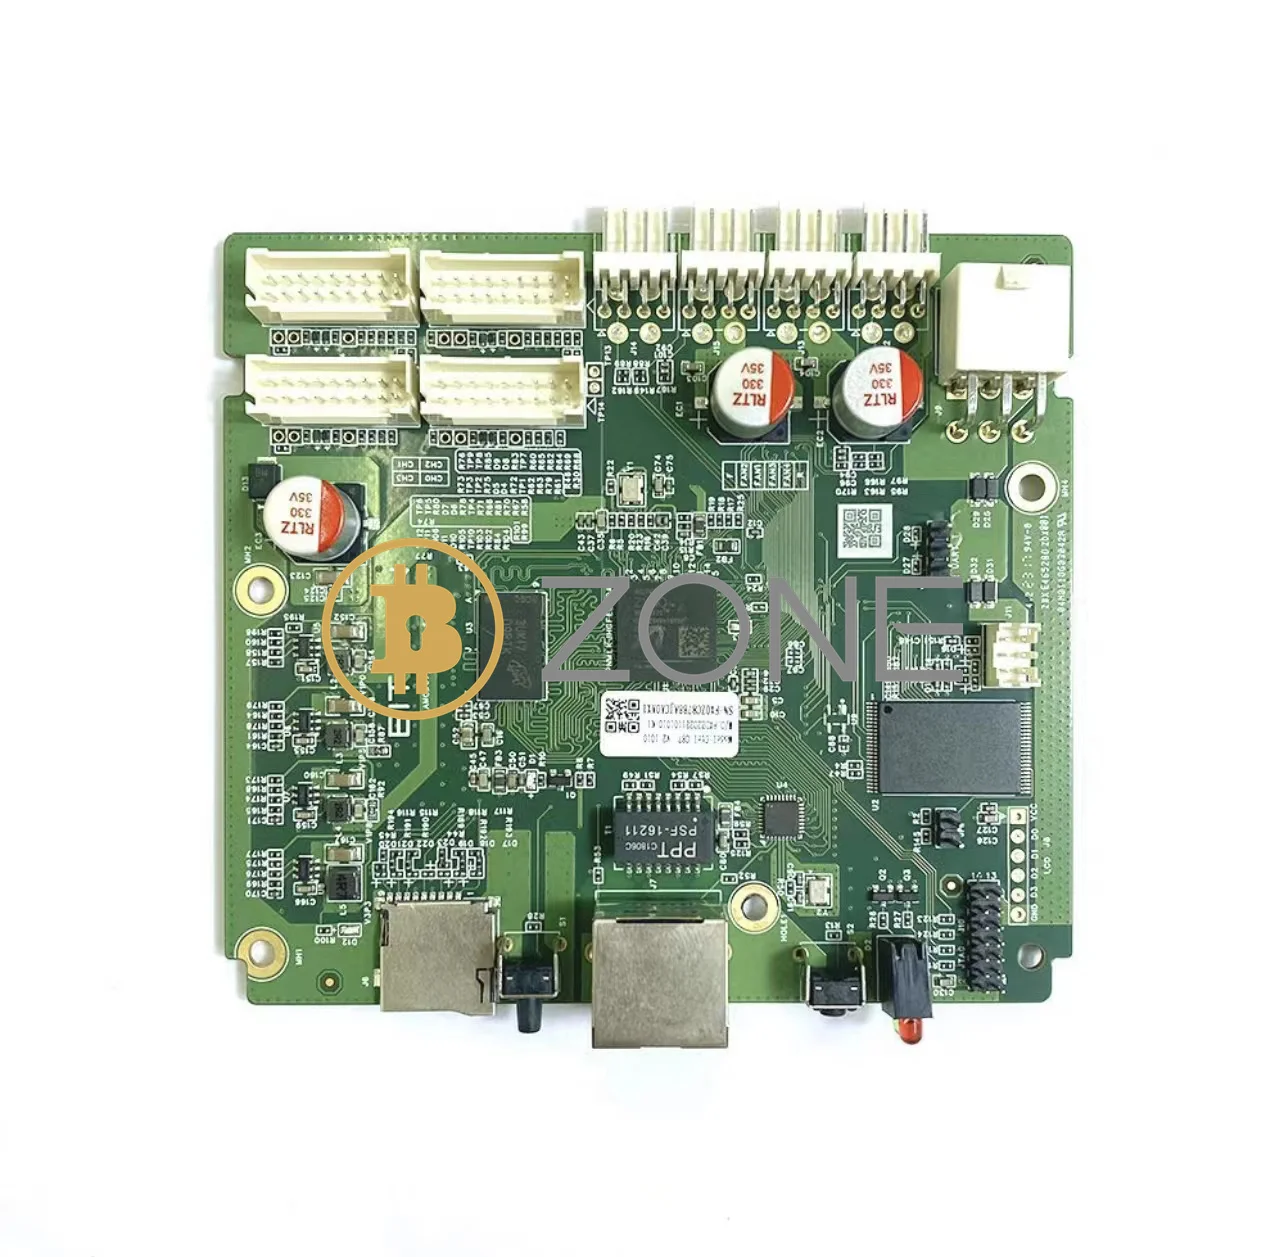 

C87 Control Board 7Z007 Controller Suitable For Bitmain Antminer S19 S19xp S19pro L7 D7 K7 S19jpro Z15 S17 All series